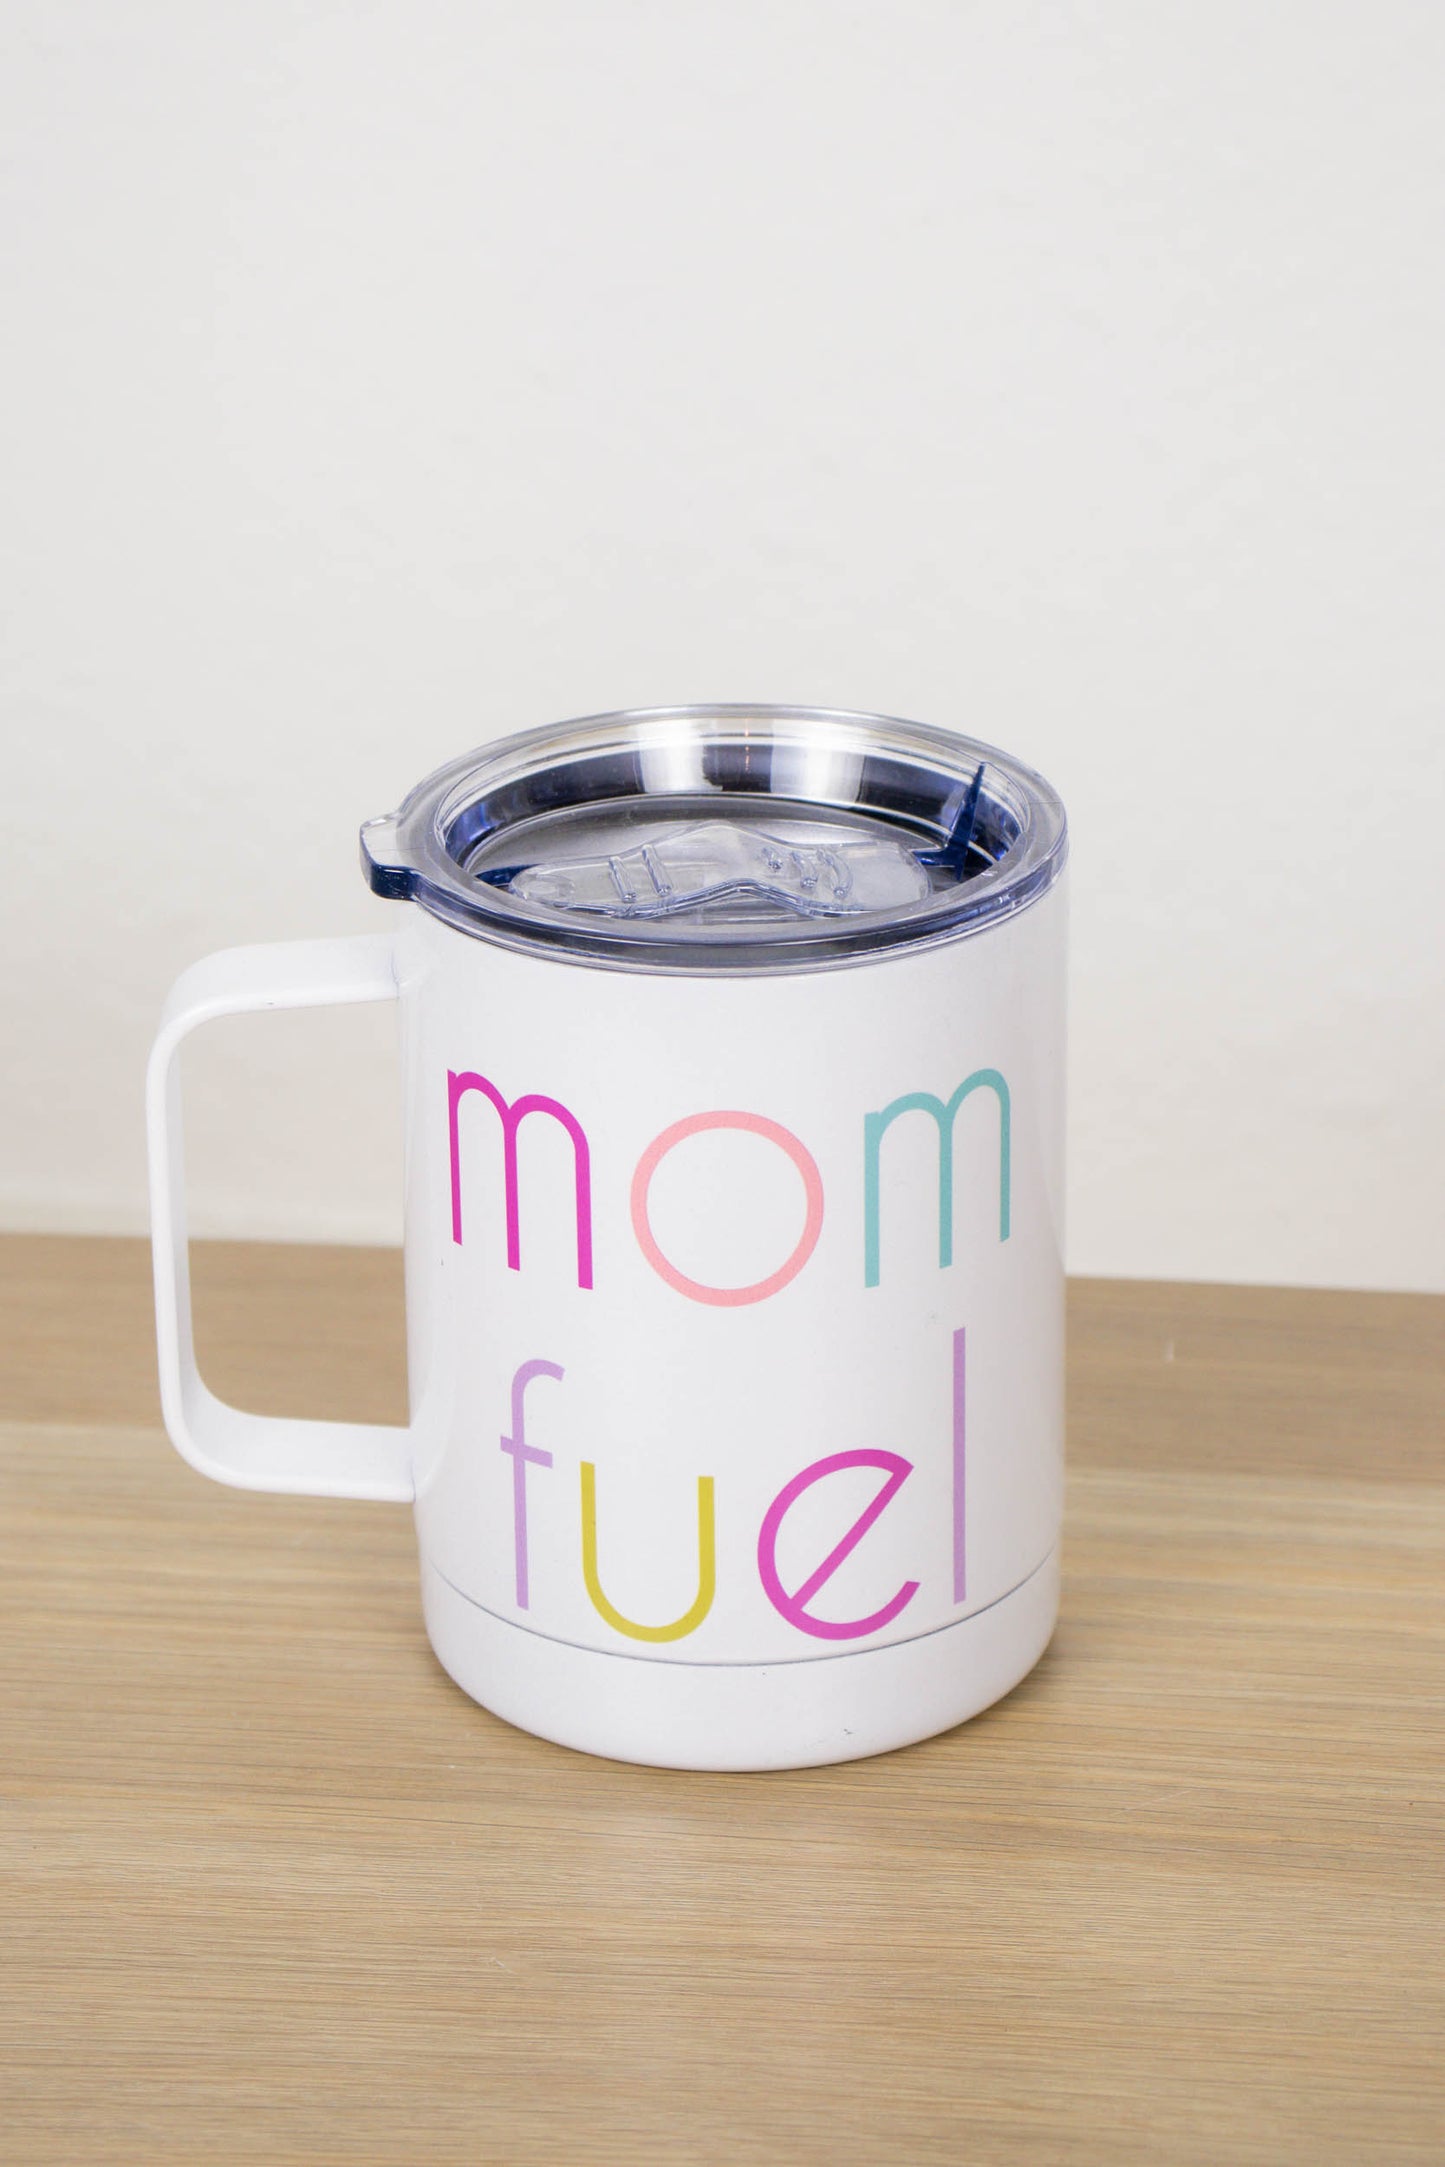 Mom Fuel Travel Cup